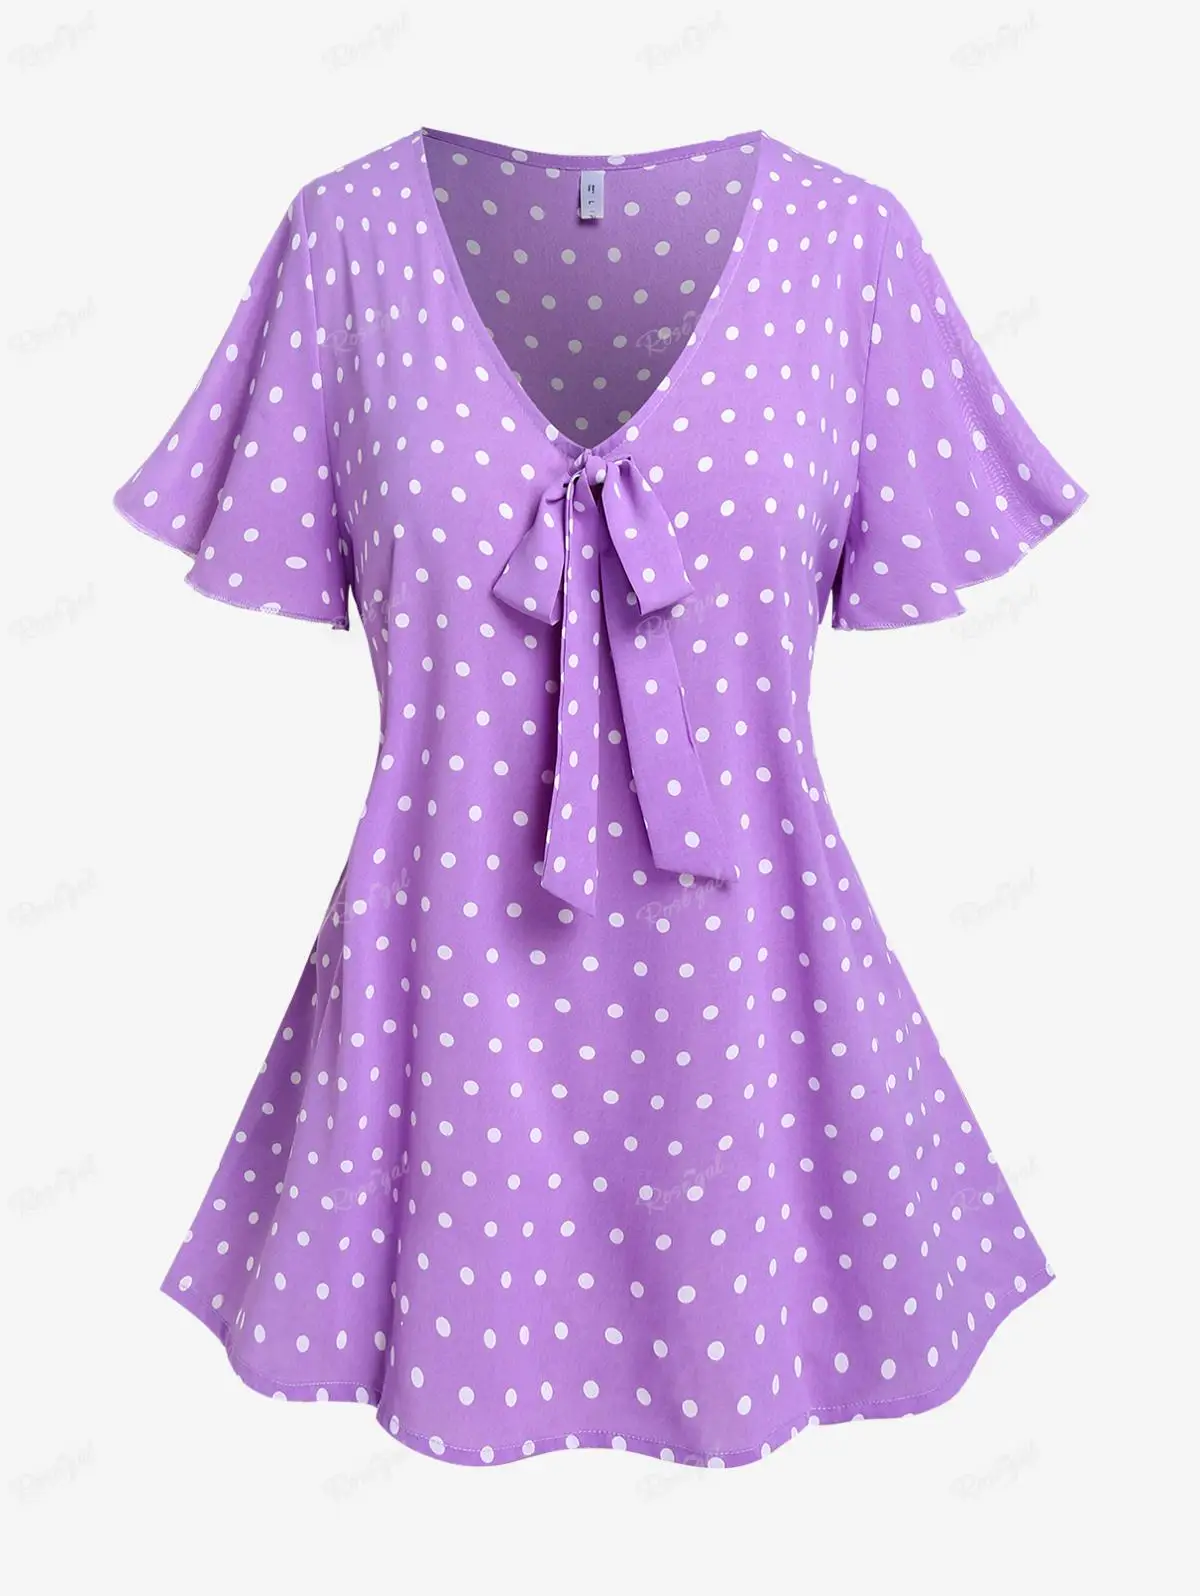 

ROSEGAL Plus Size Polka Dot Bowknot V Neck Tee Purple Women Summer Flutter Sleeves Blouses Top Casual T-shirts 4XL